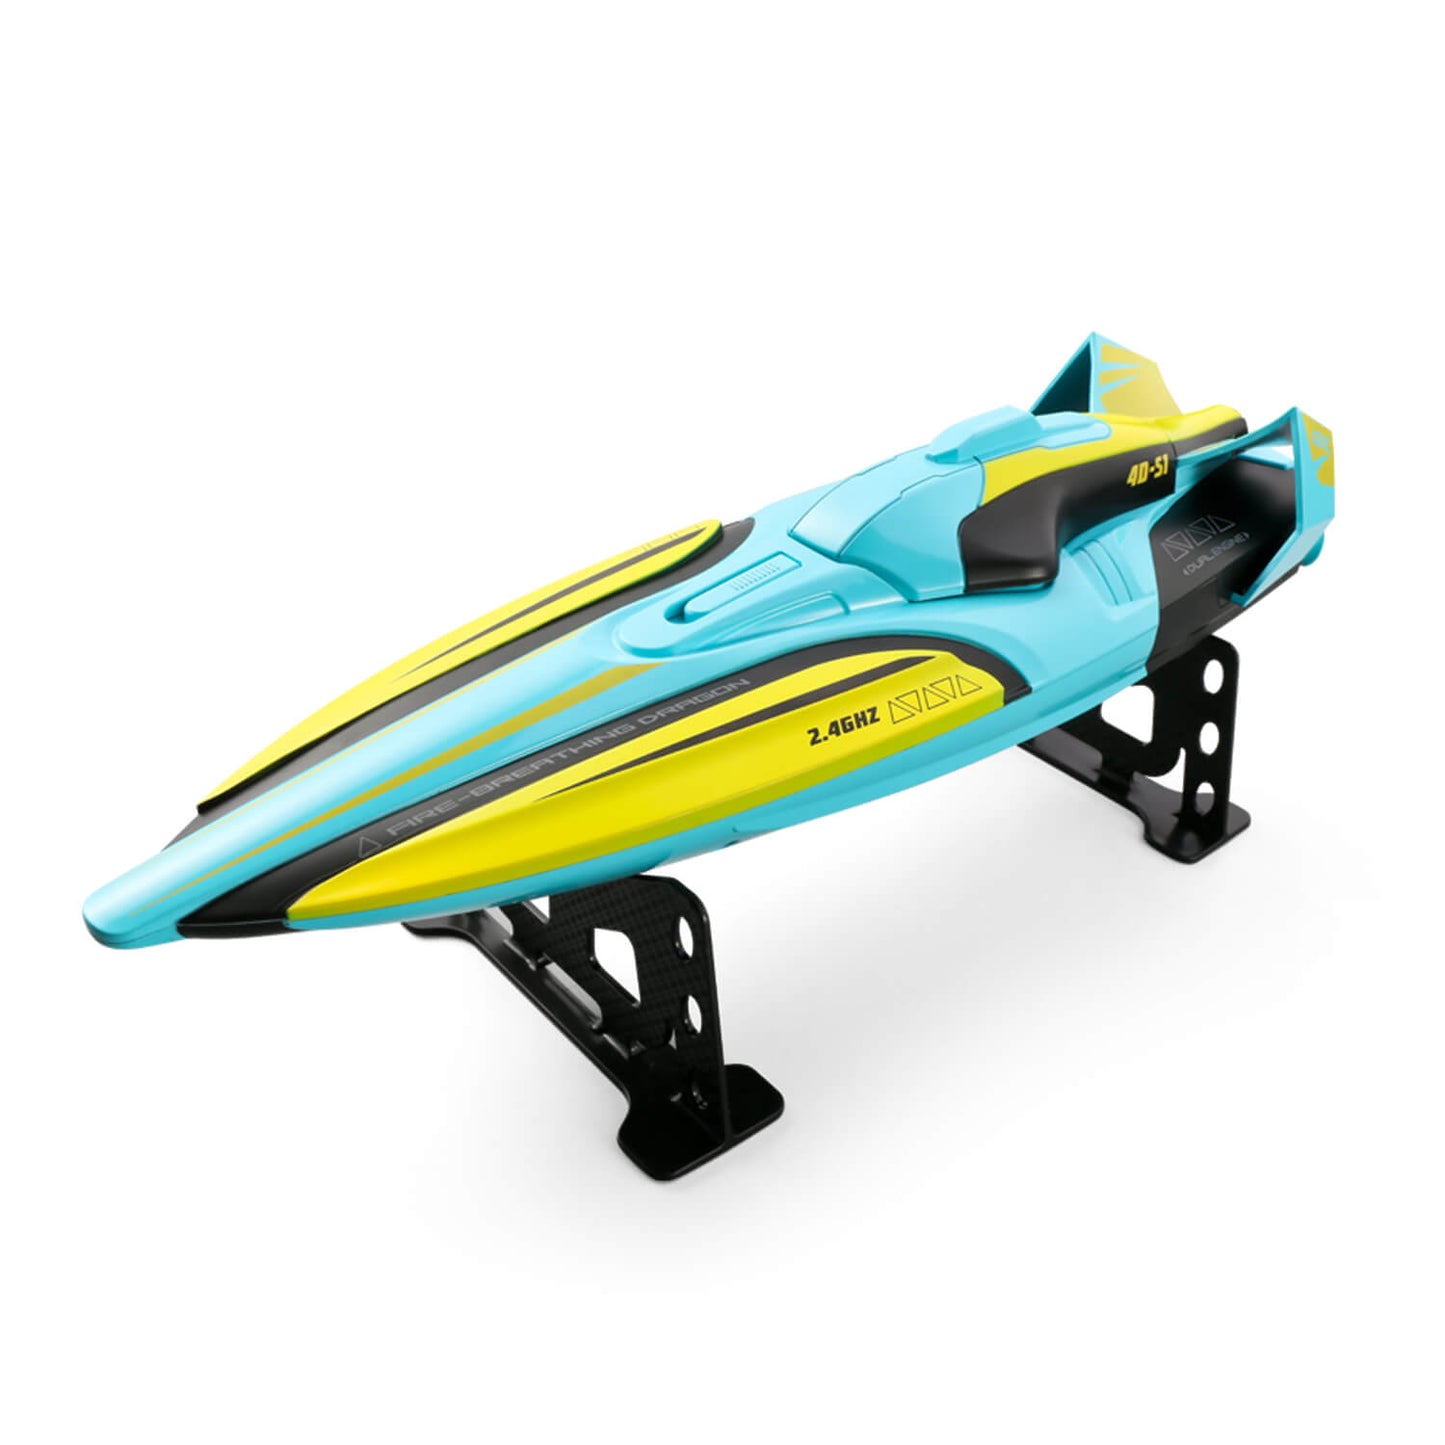 4D-S1 Remote Control Boat (Yellow) with 2 Batteries